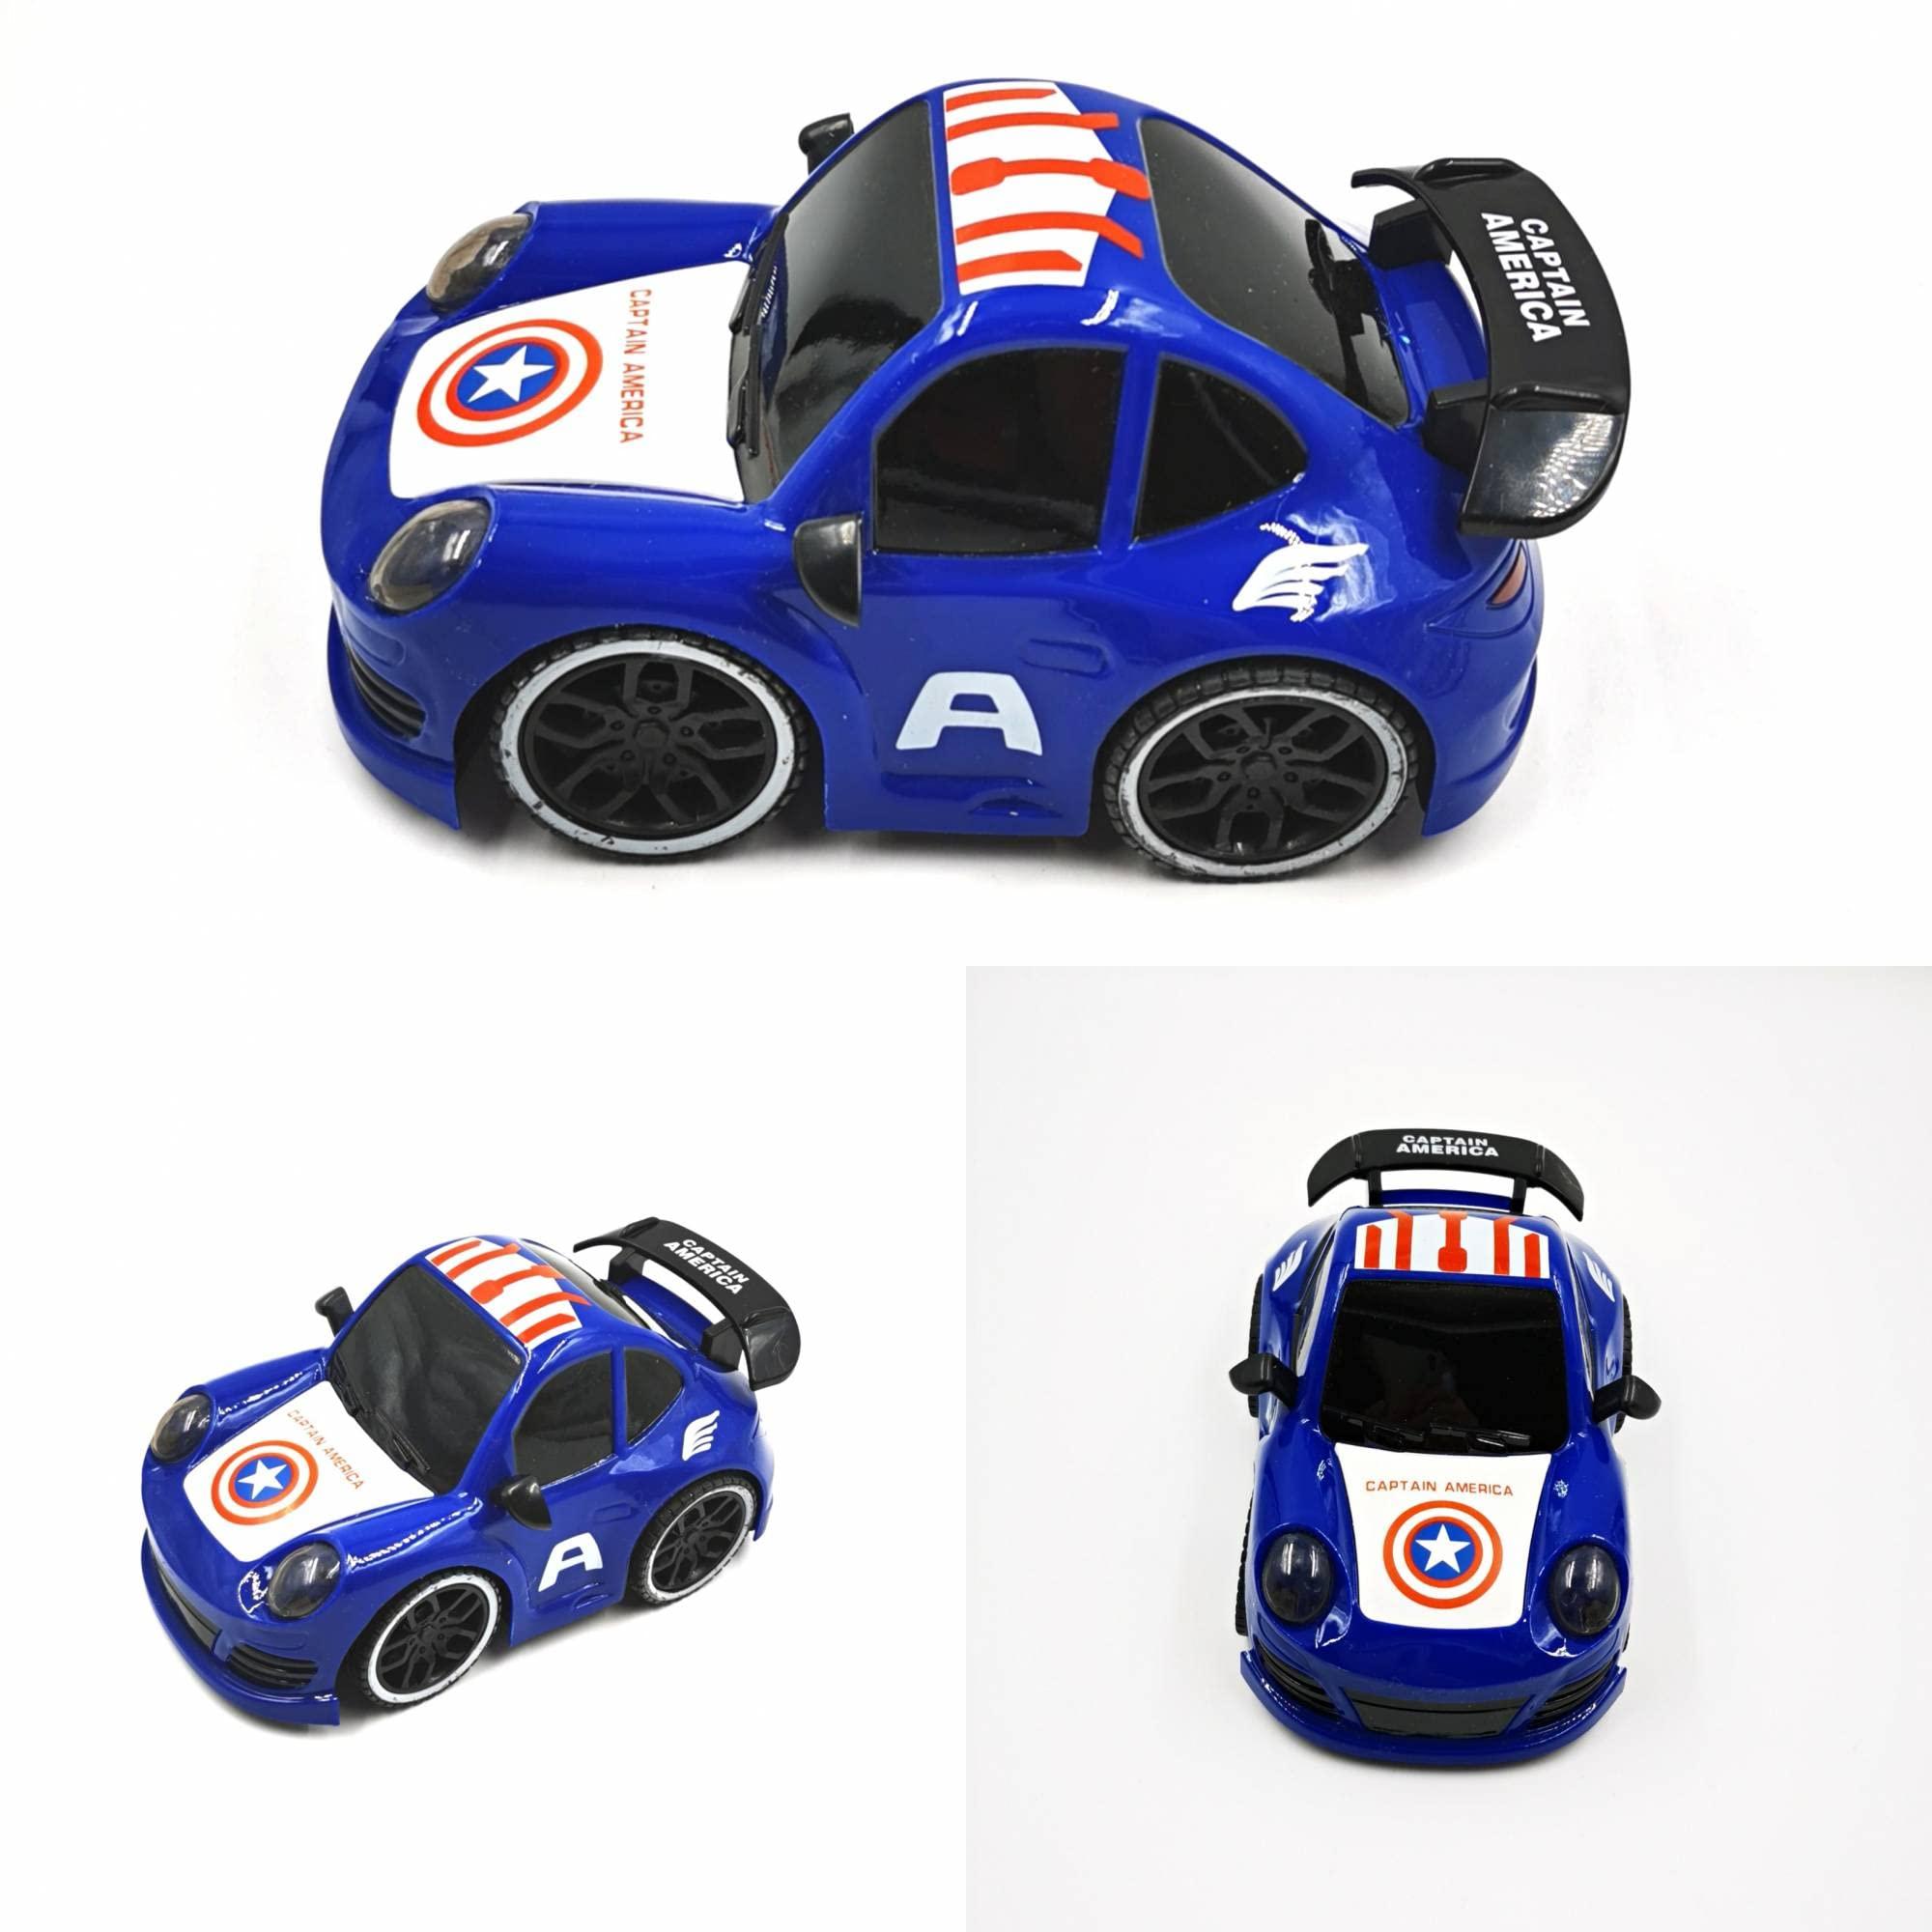 Avengers Remote Control Car: Purchasing and saving tips for the Avengers remote control car.